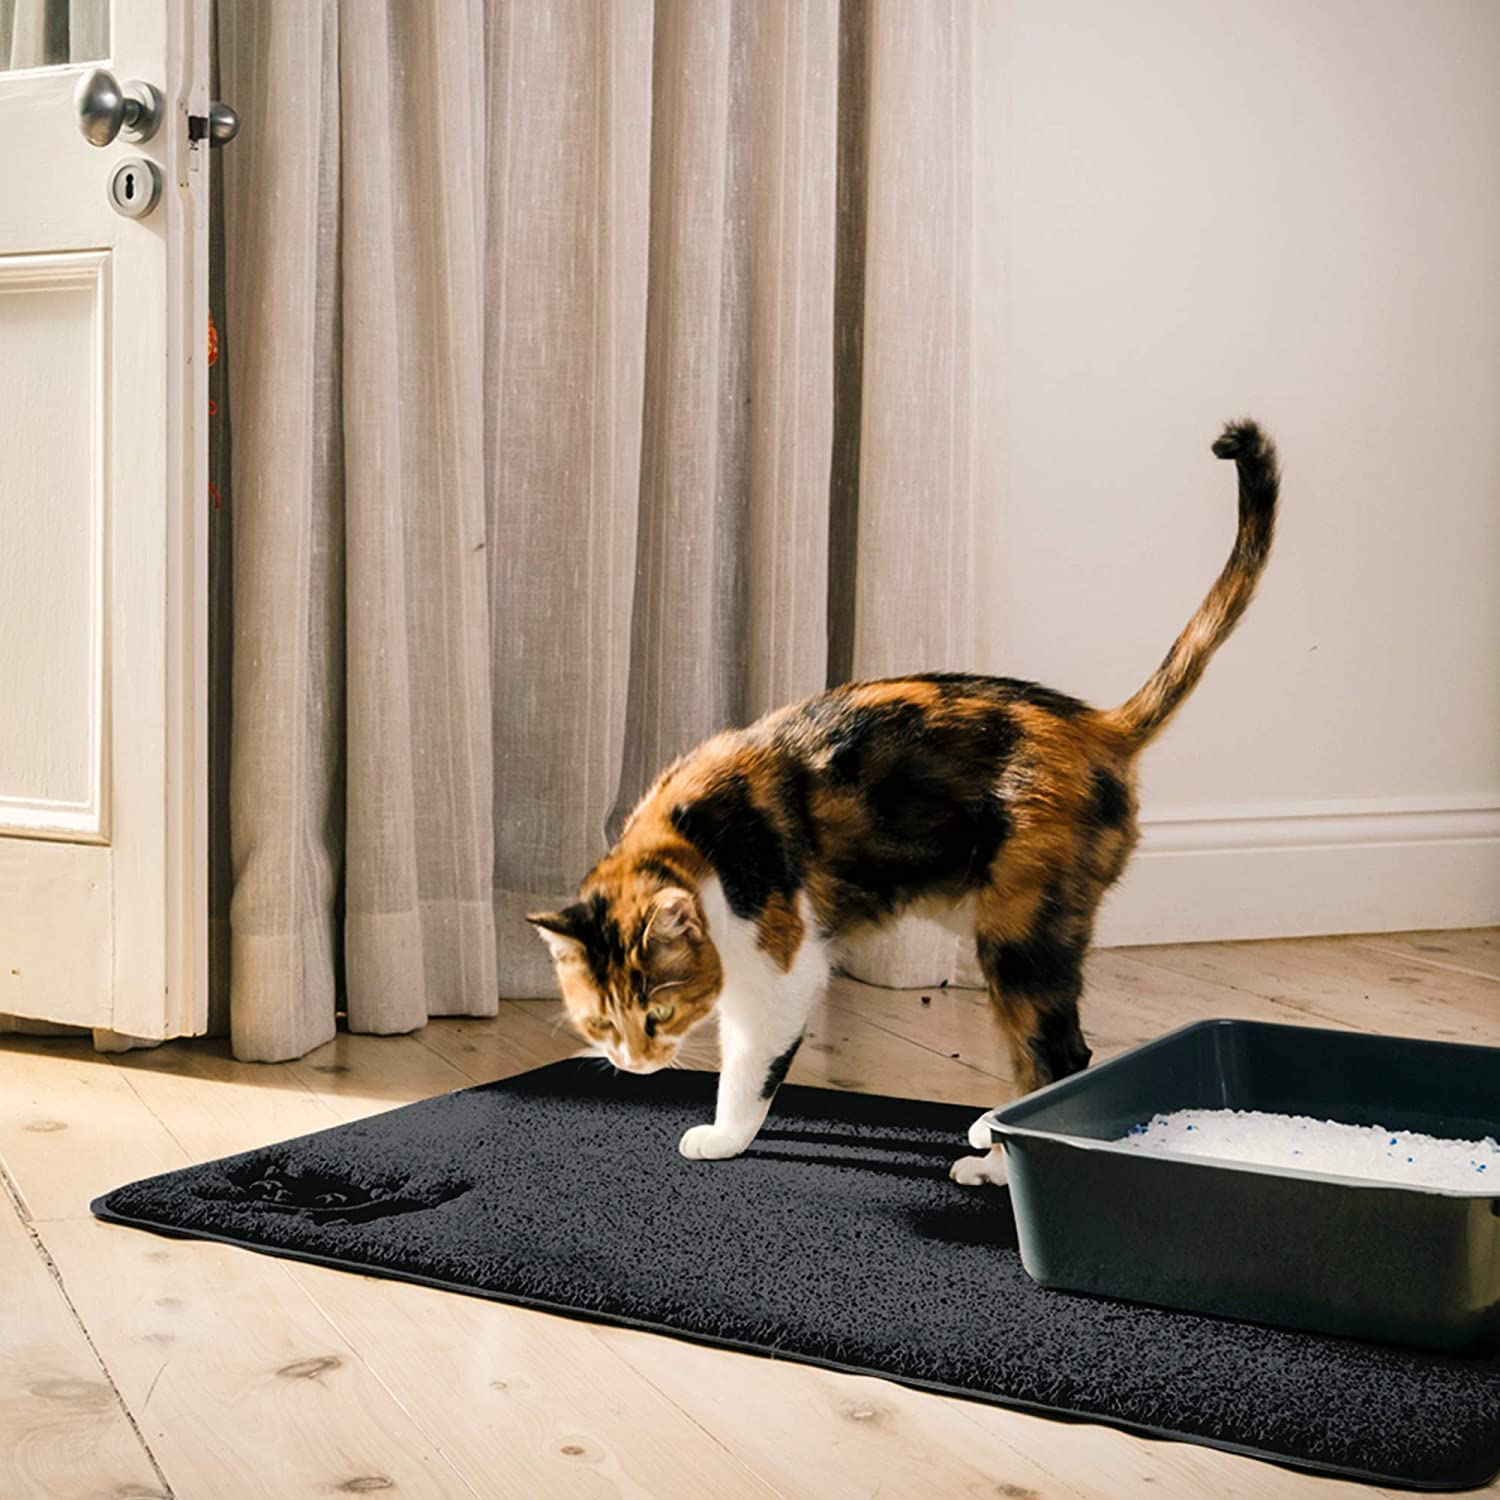 Cat Litter Mat, XL Super size, Phthalate Free, Easy to Clean, Durable, Soft on Paws, Large 47 x 36 Litter Mat.